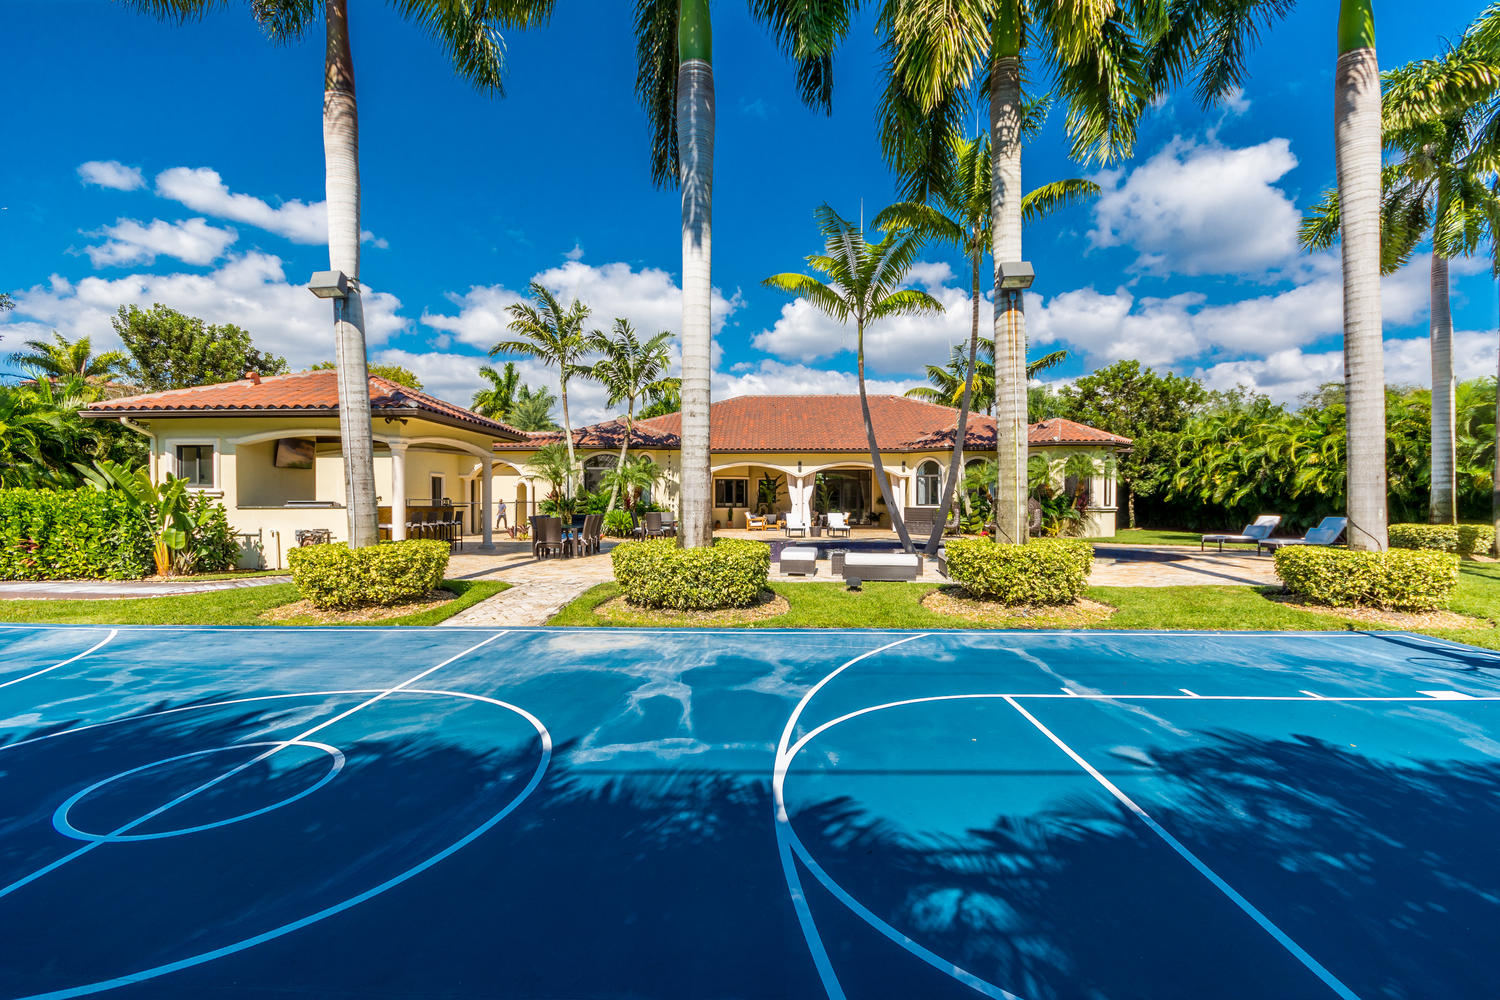 A blue basketball court outside a mediterranean home in Pinecrest, with an orange roof.